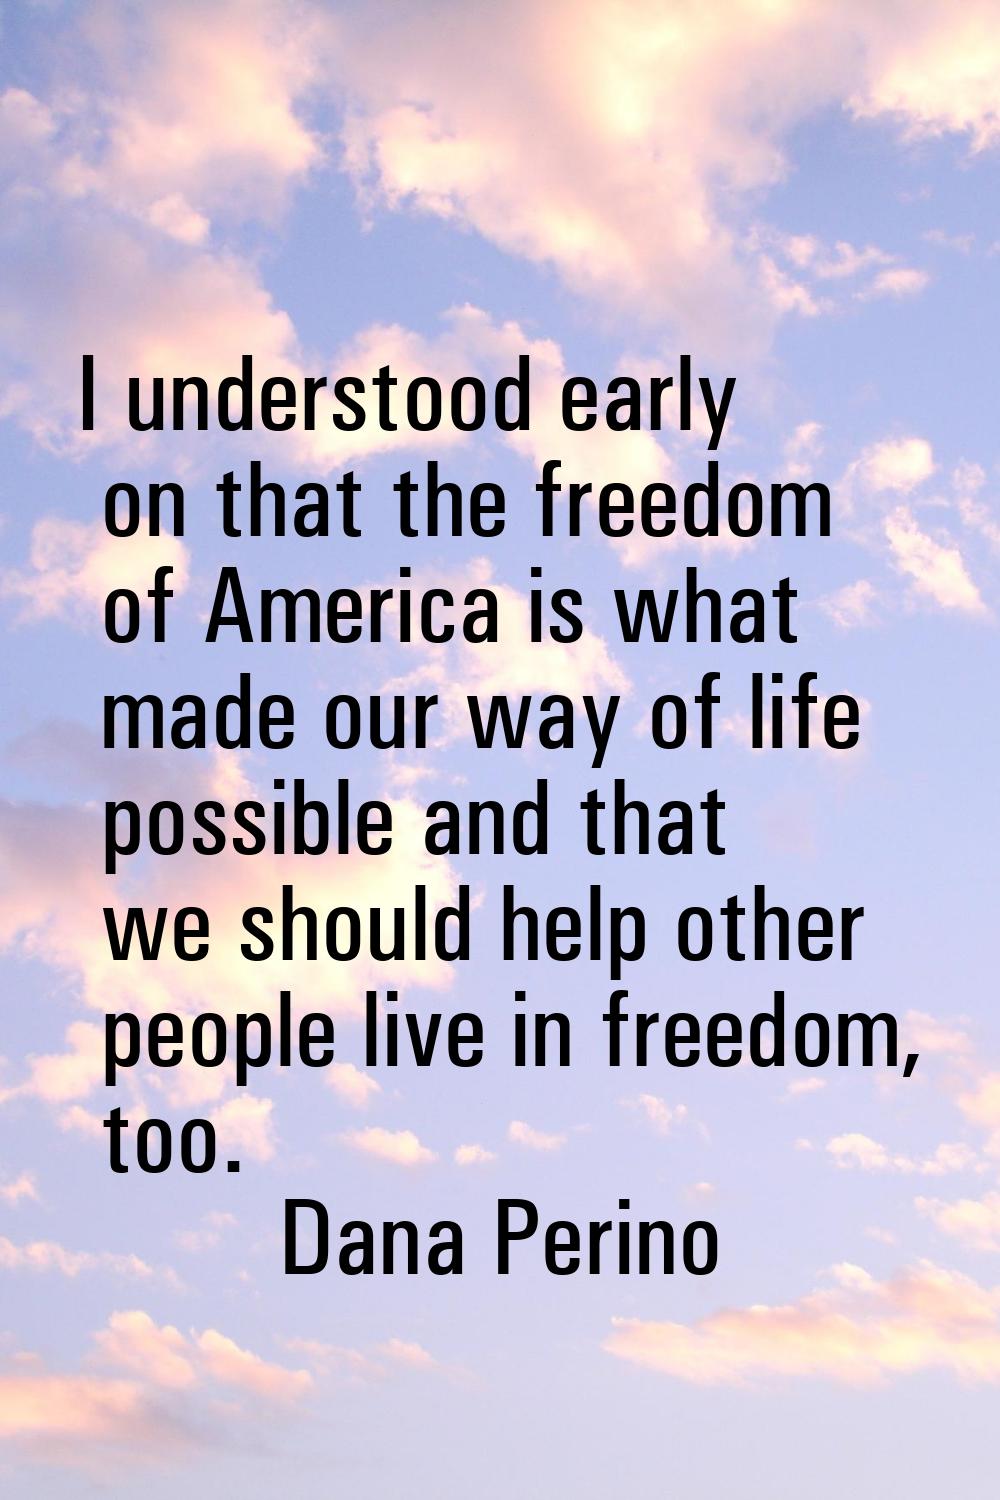 I understood early on that the freedom of America is what made our way of life possible and that we